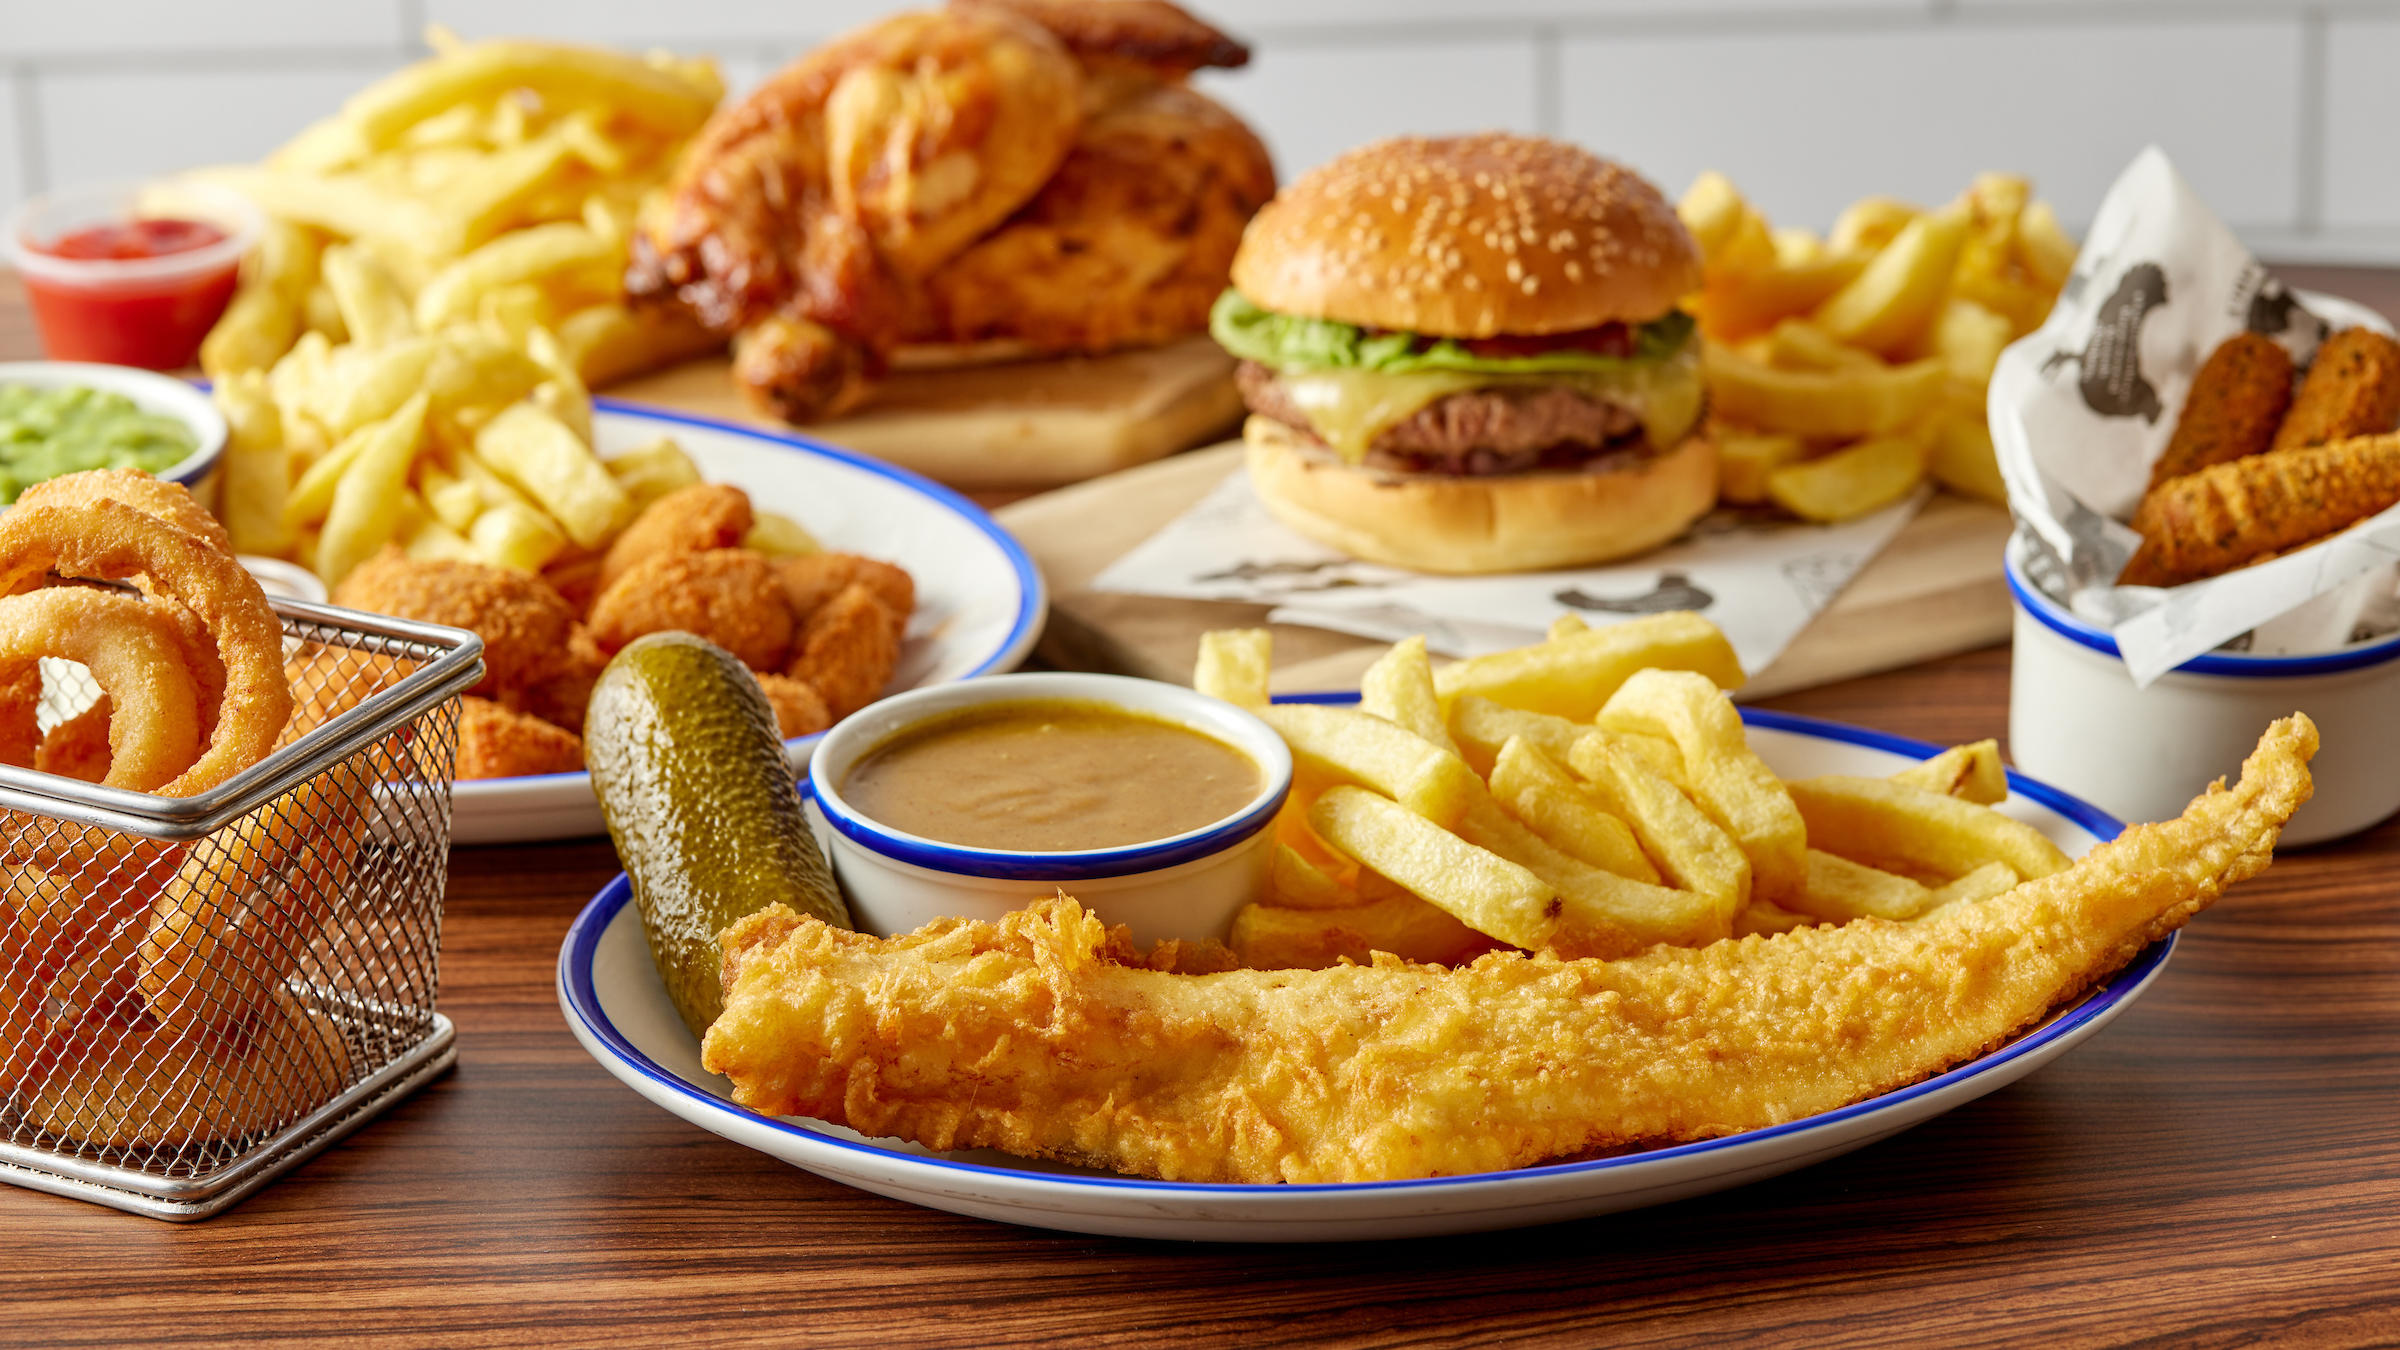 Enjoy Churchills fish and chips your way! Order click & collect through our simple online ordering w Churchill's Fish & Chips Didcot Didcot 01235 814385